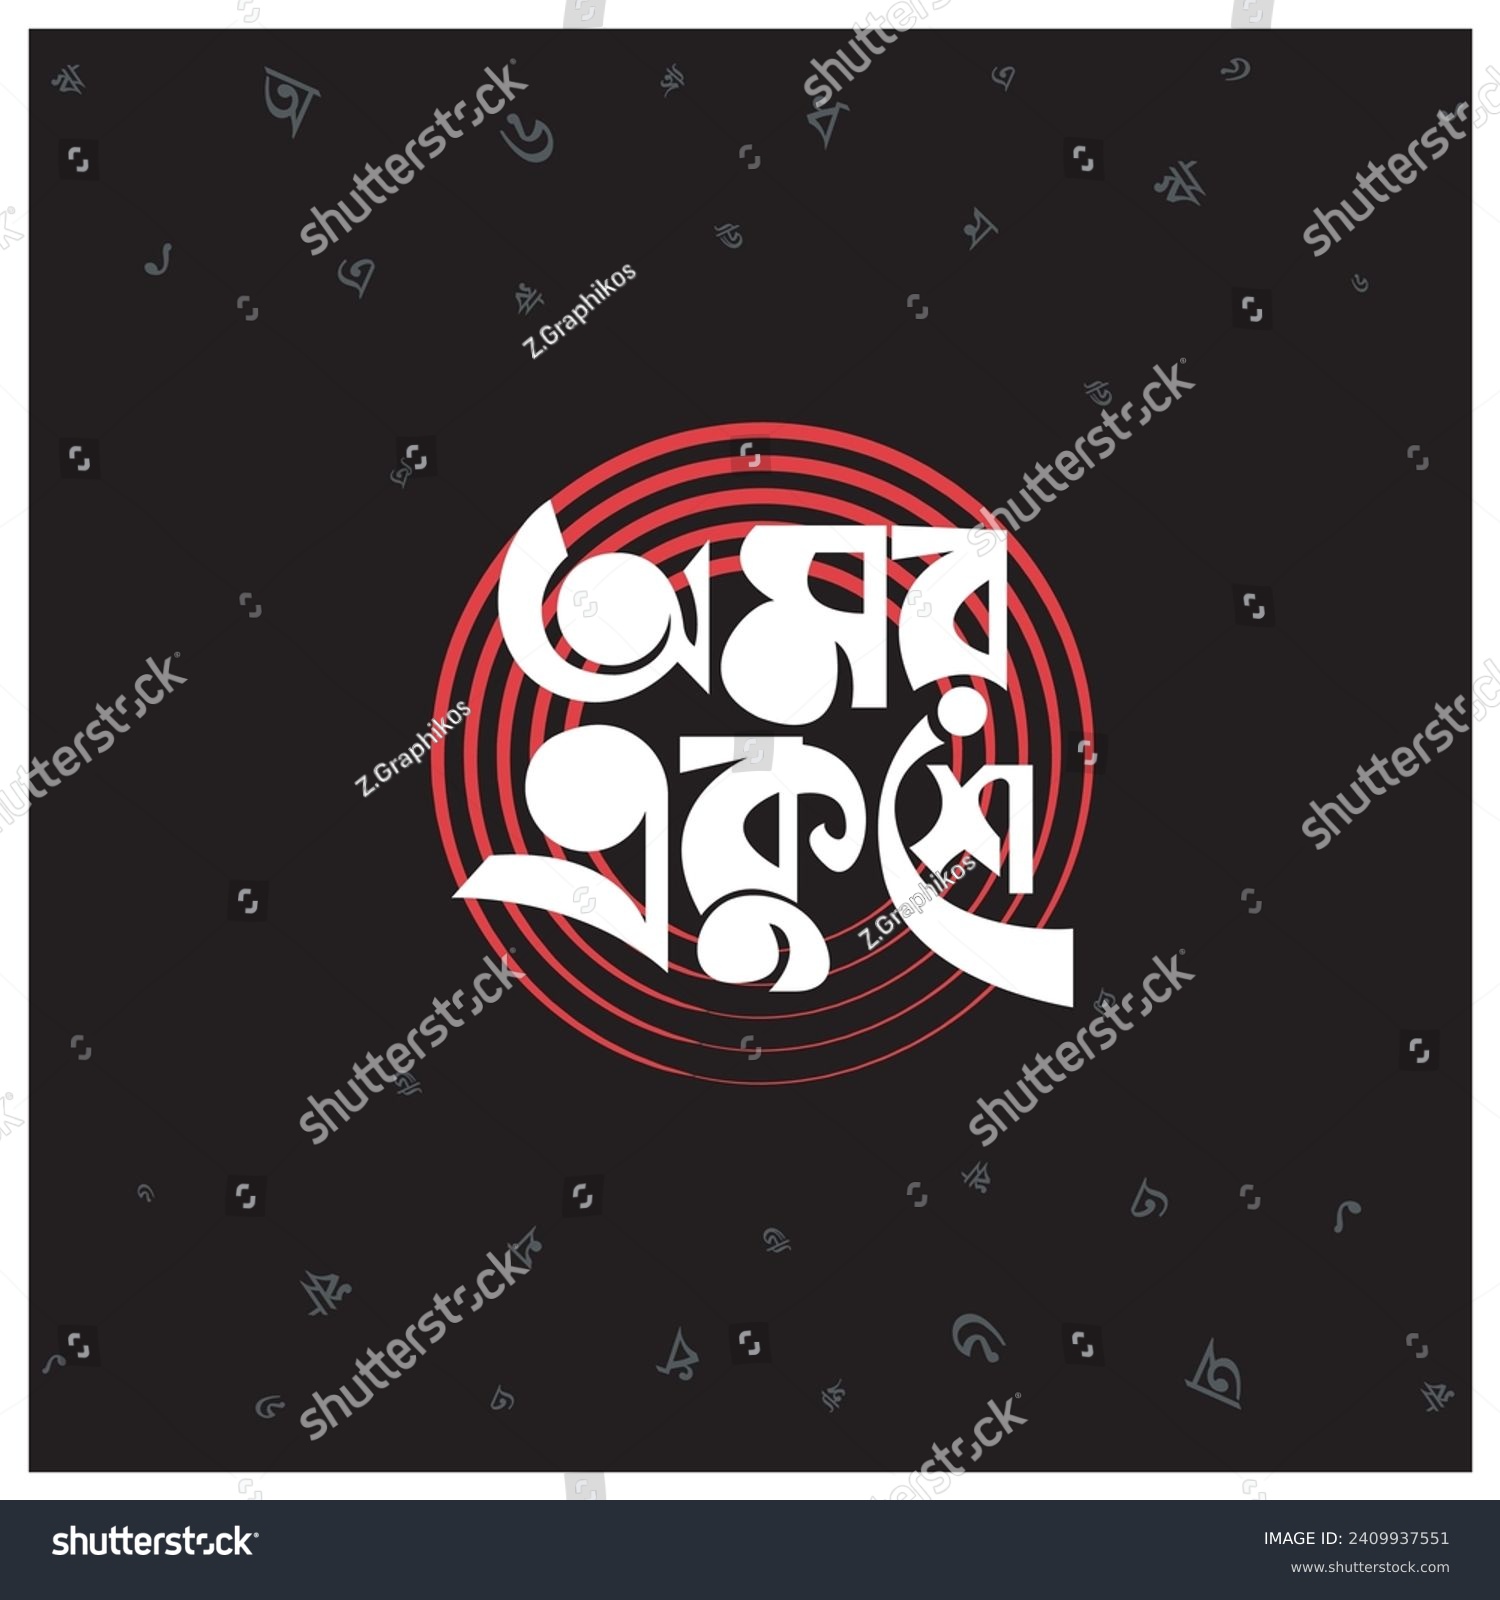 SVG of International mother language day in Bangladesh, 21st February 1952 .Illustration of Shaheed Minar, the Bengali words say 